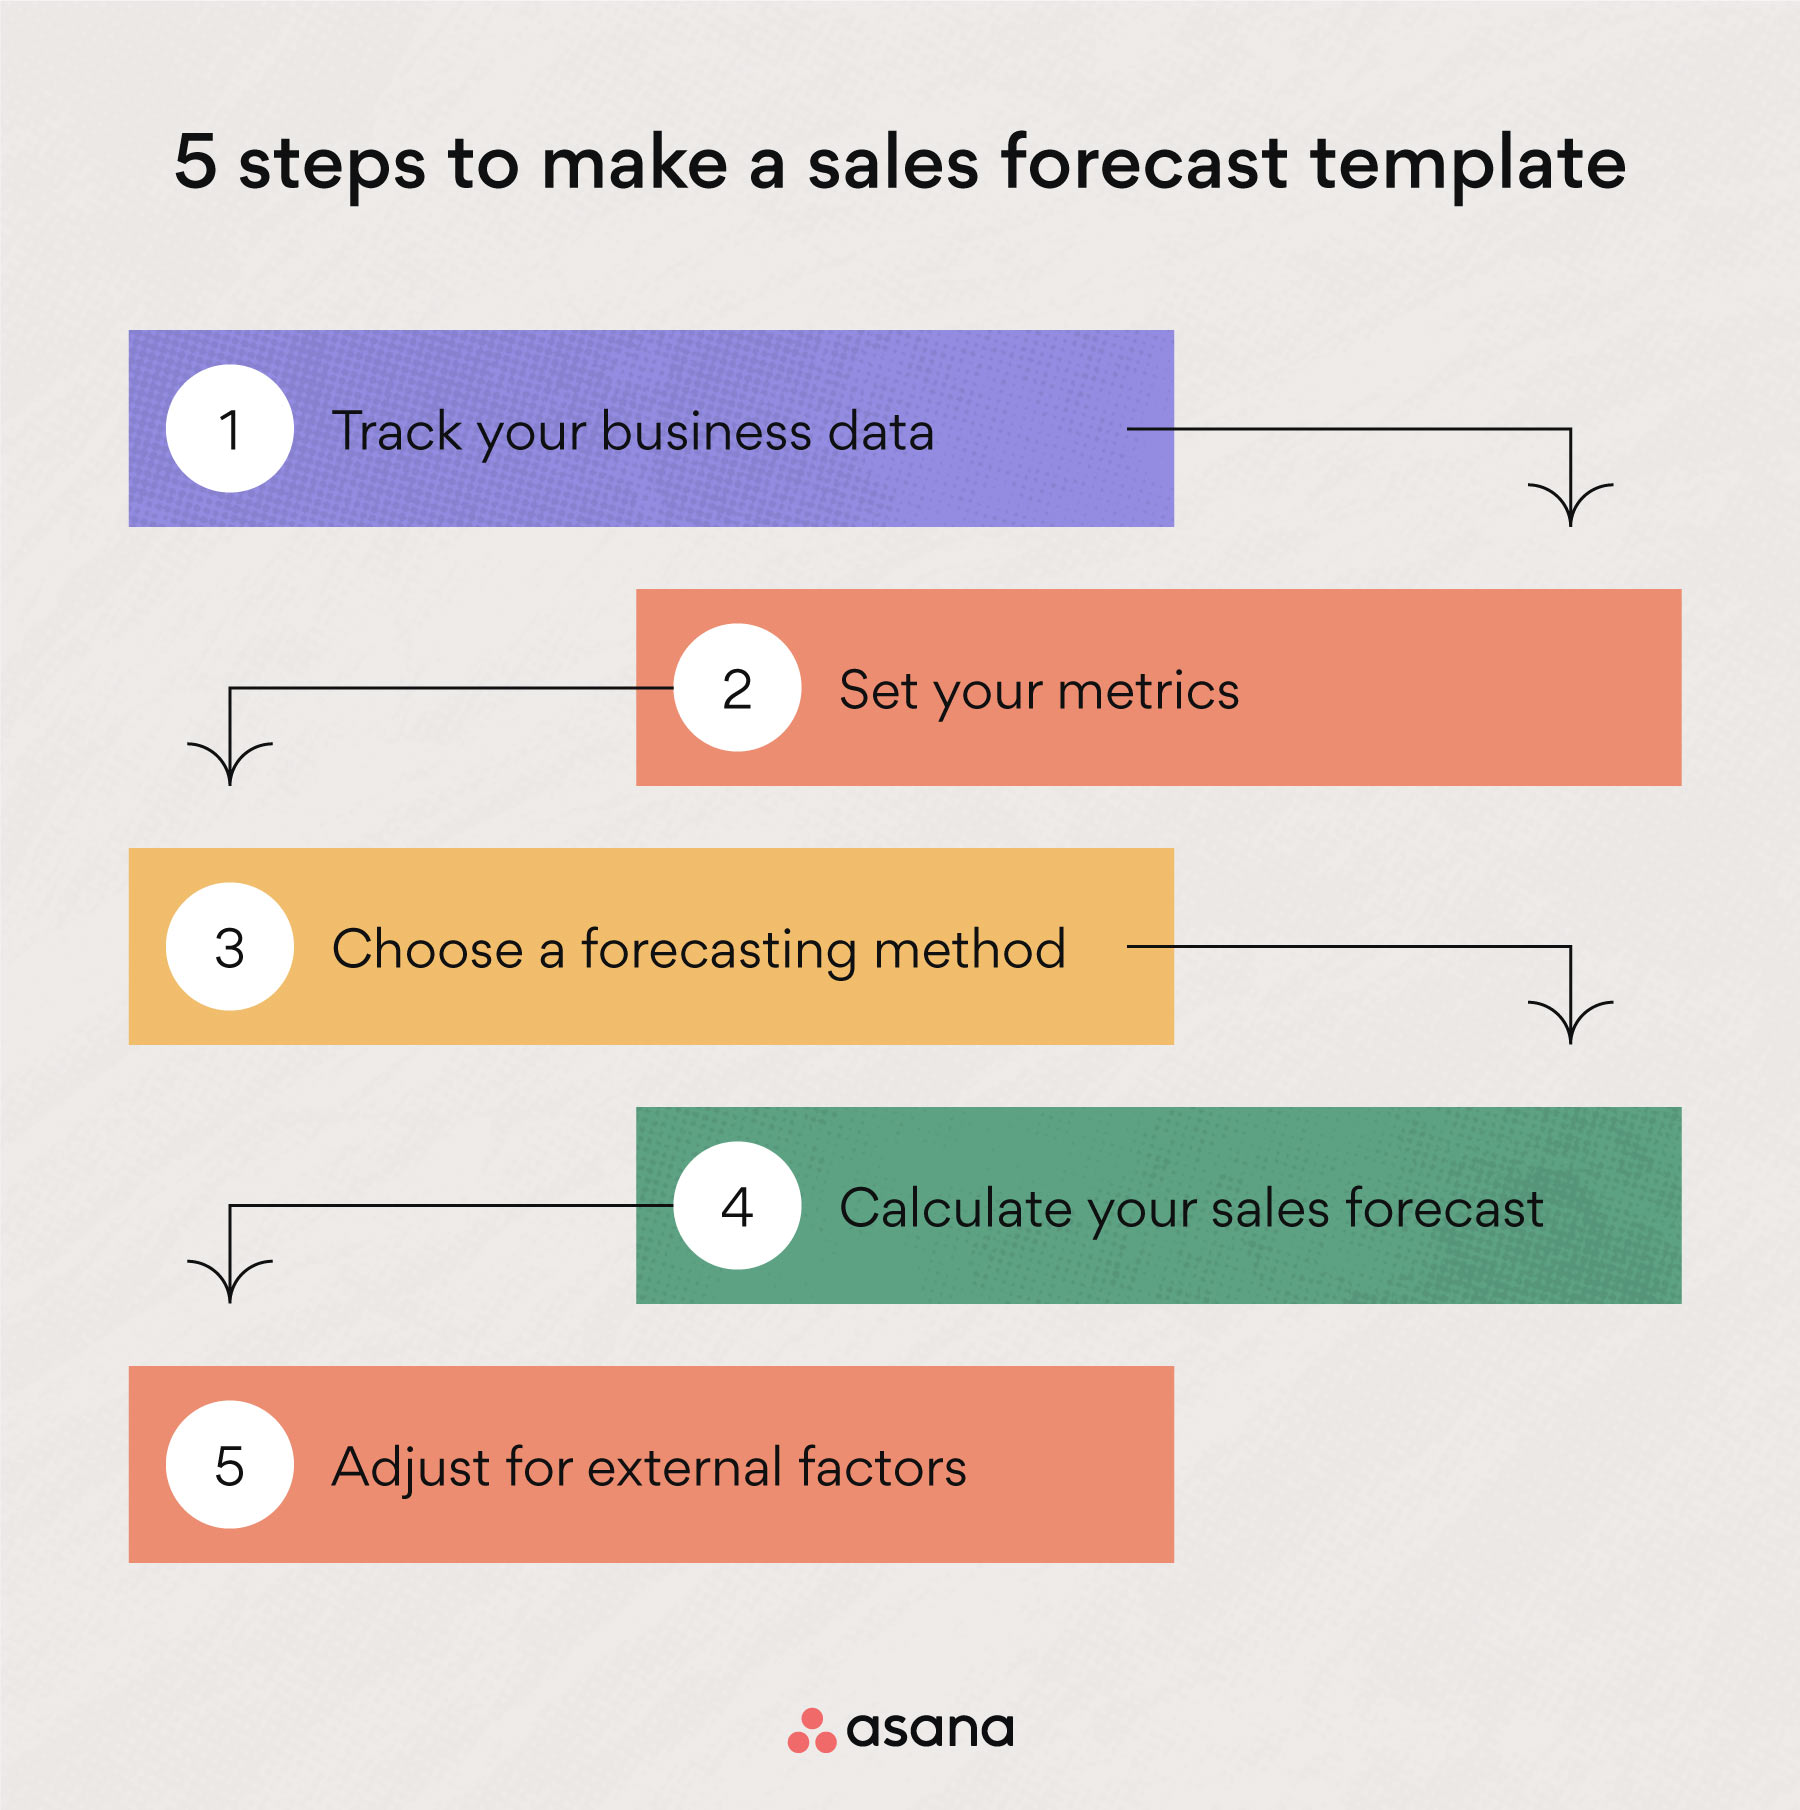 [inline illustration] 5 steps to make a sales forecast template (infographic)